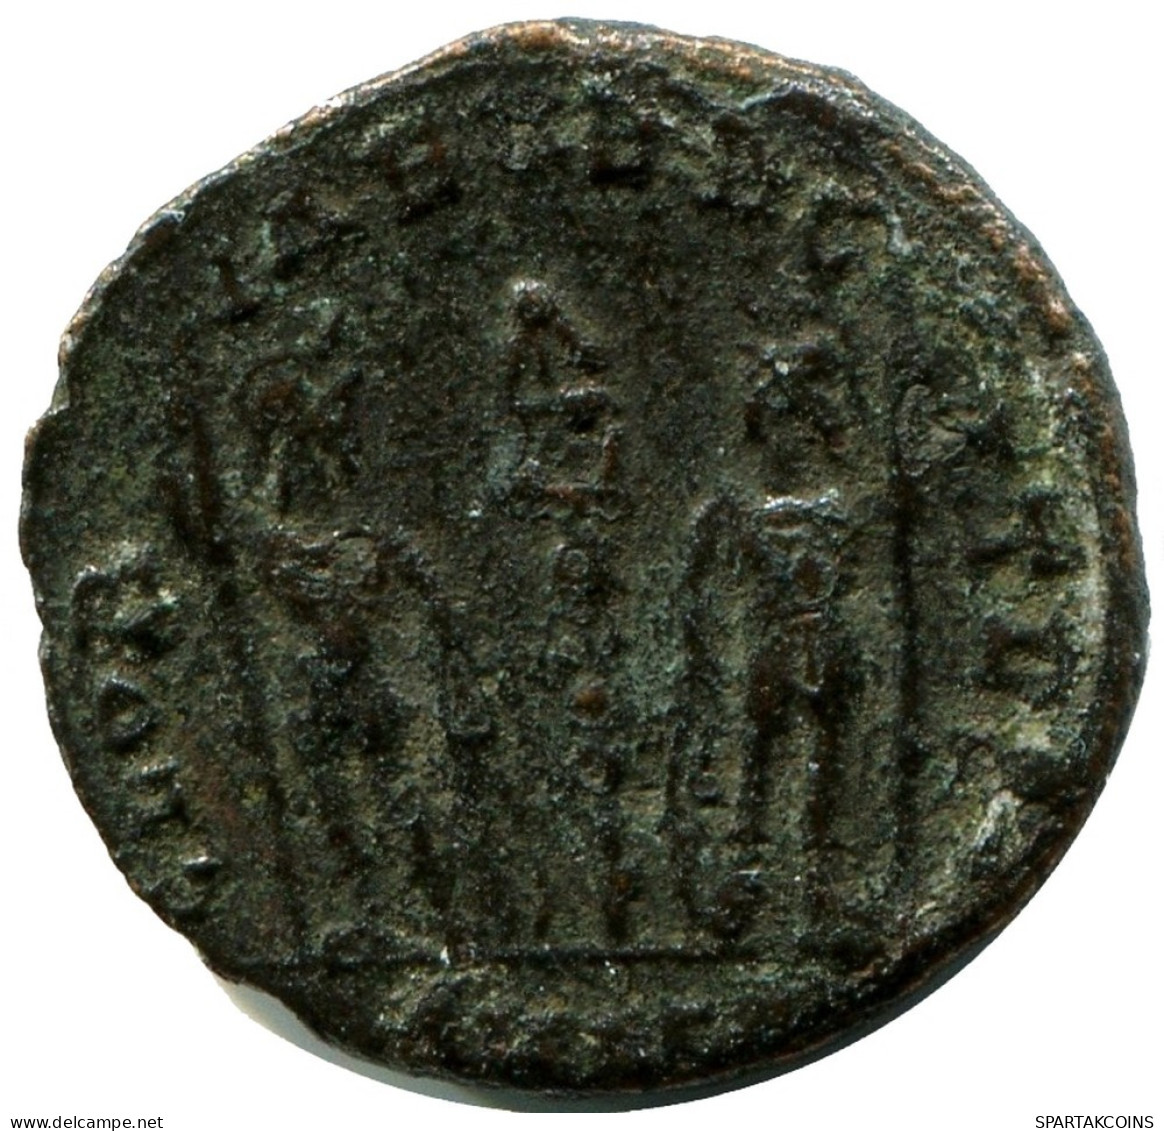 CONSTANS MINTED IN ALEKSANDRIA FROM THE ROYAL ONTARIO MUSEUM #ANC11401.14.F.A - L'Empire Chrétien (307 à 363)